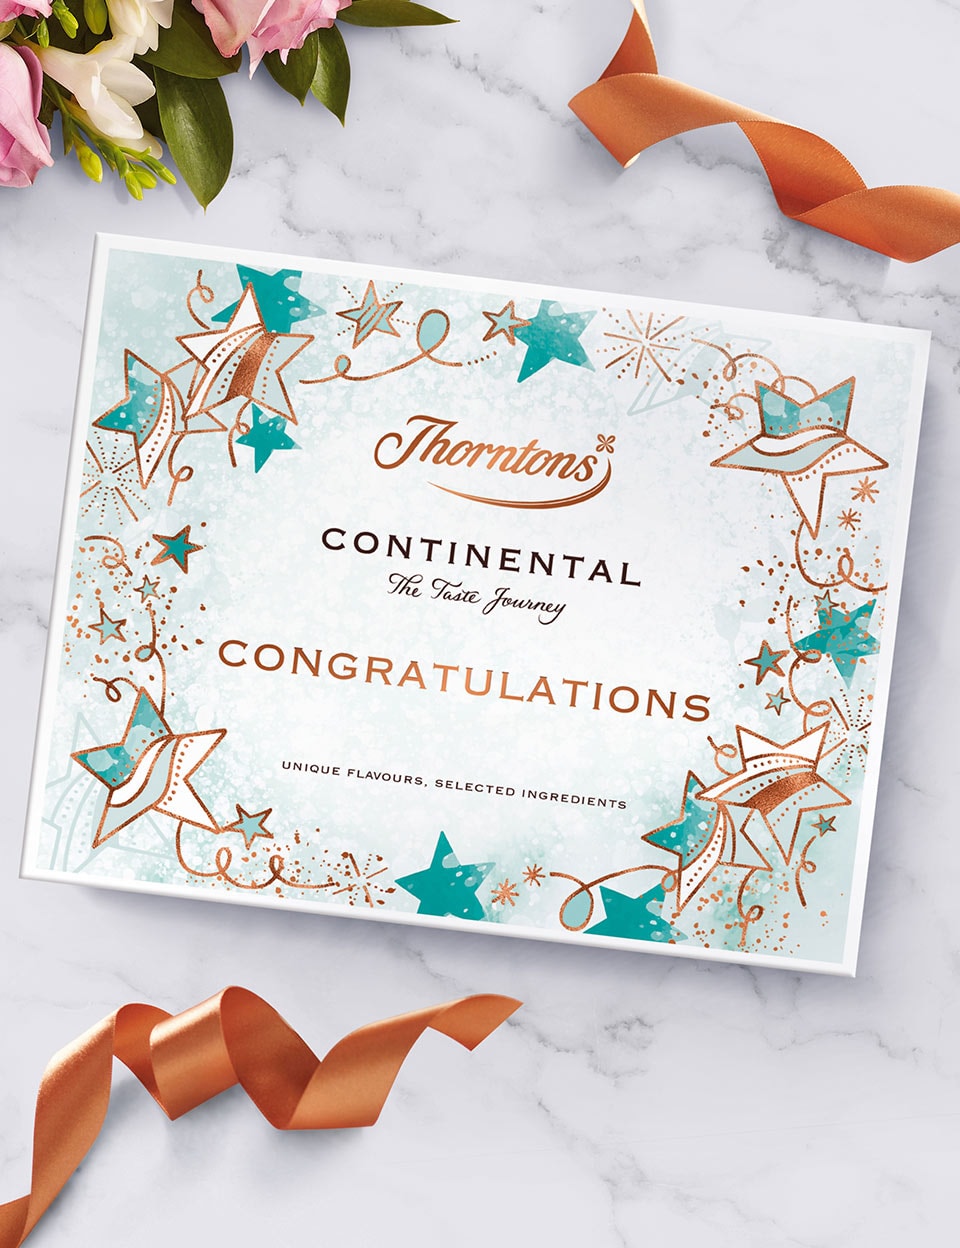 Thorntons Continental box with a congratulations gift sleeve on a marble table